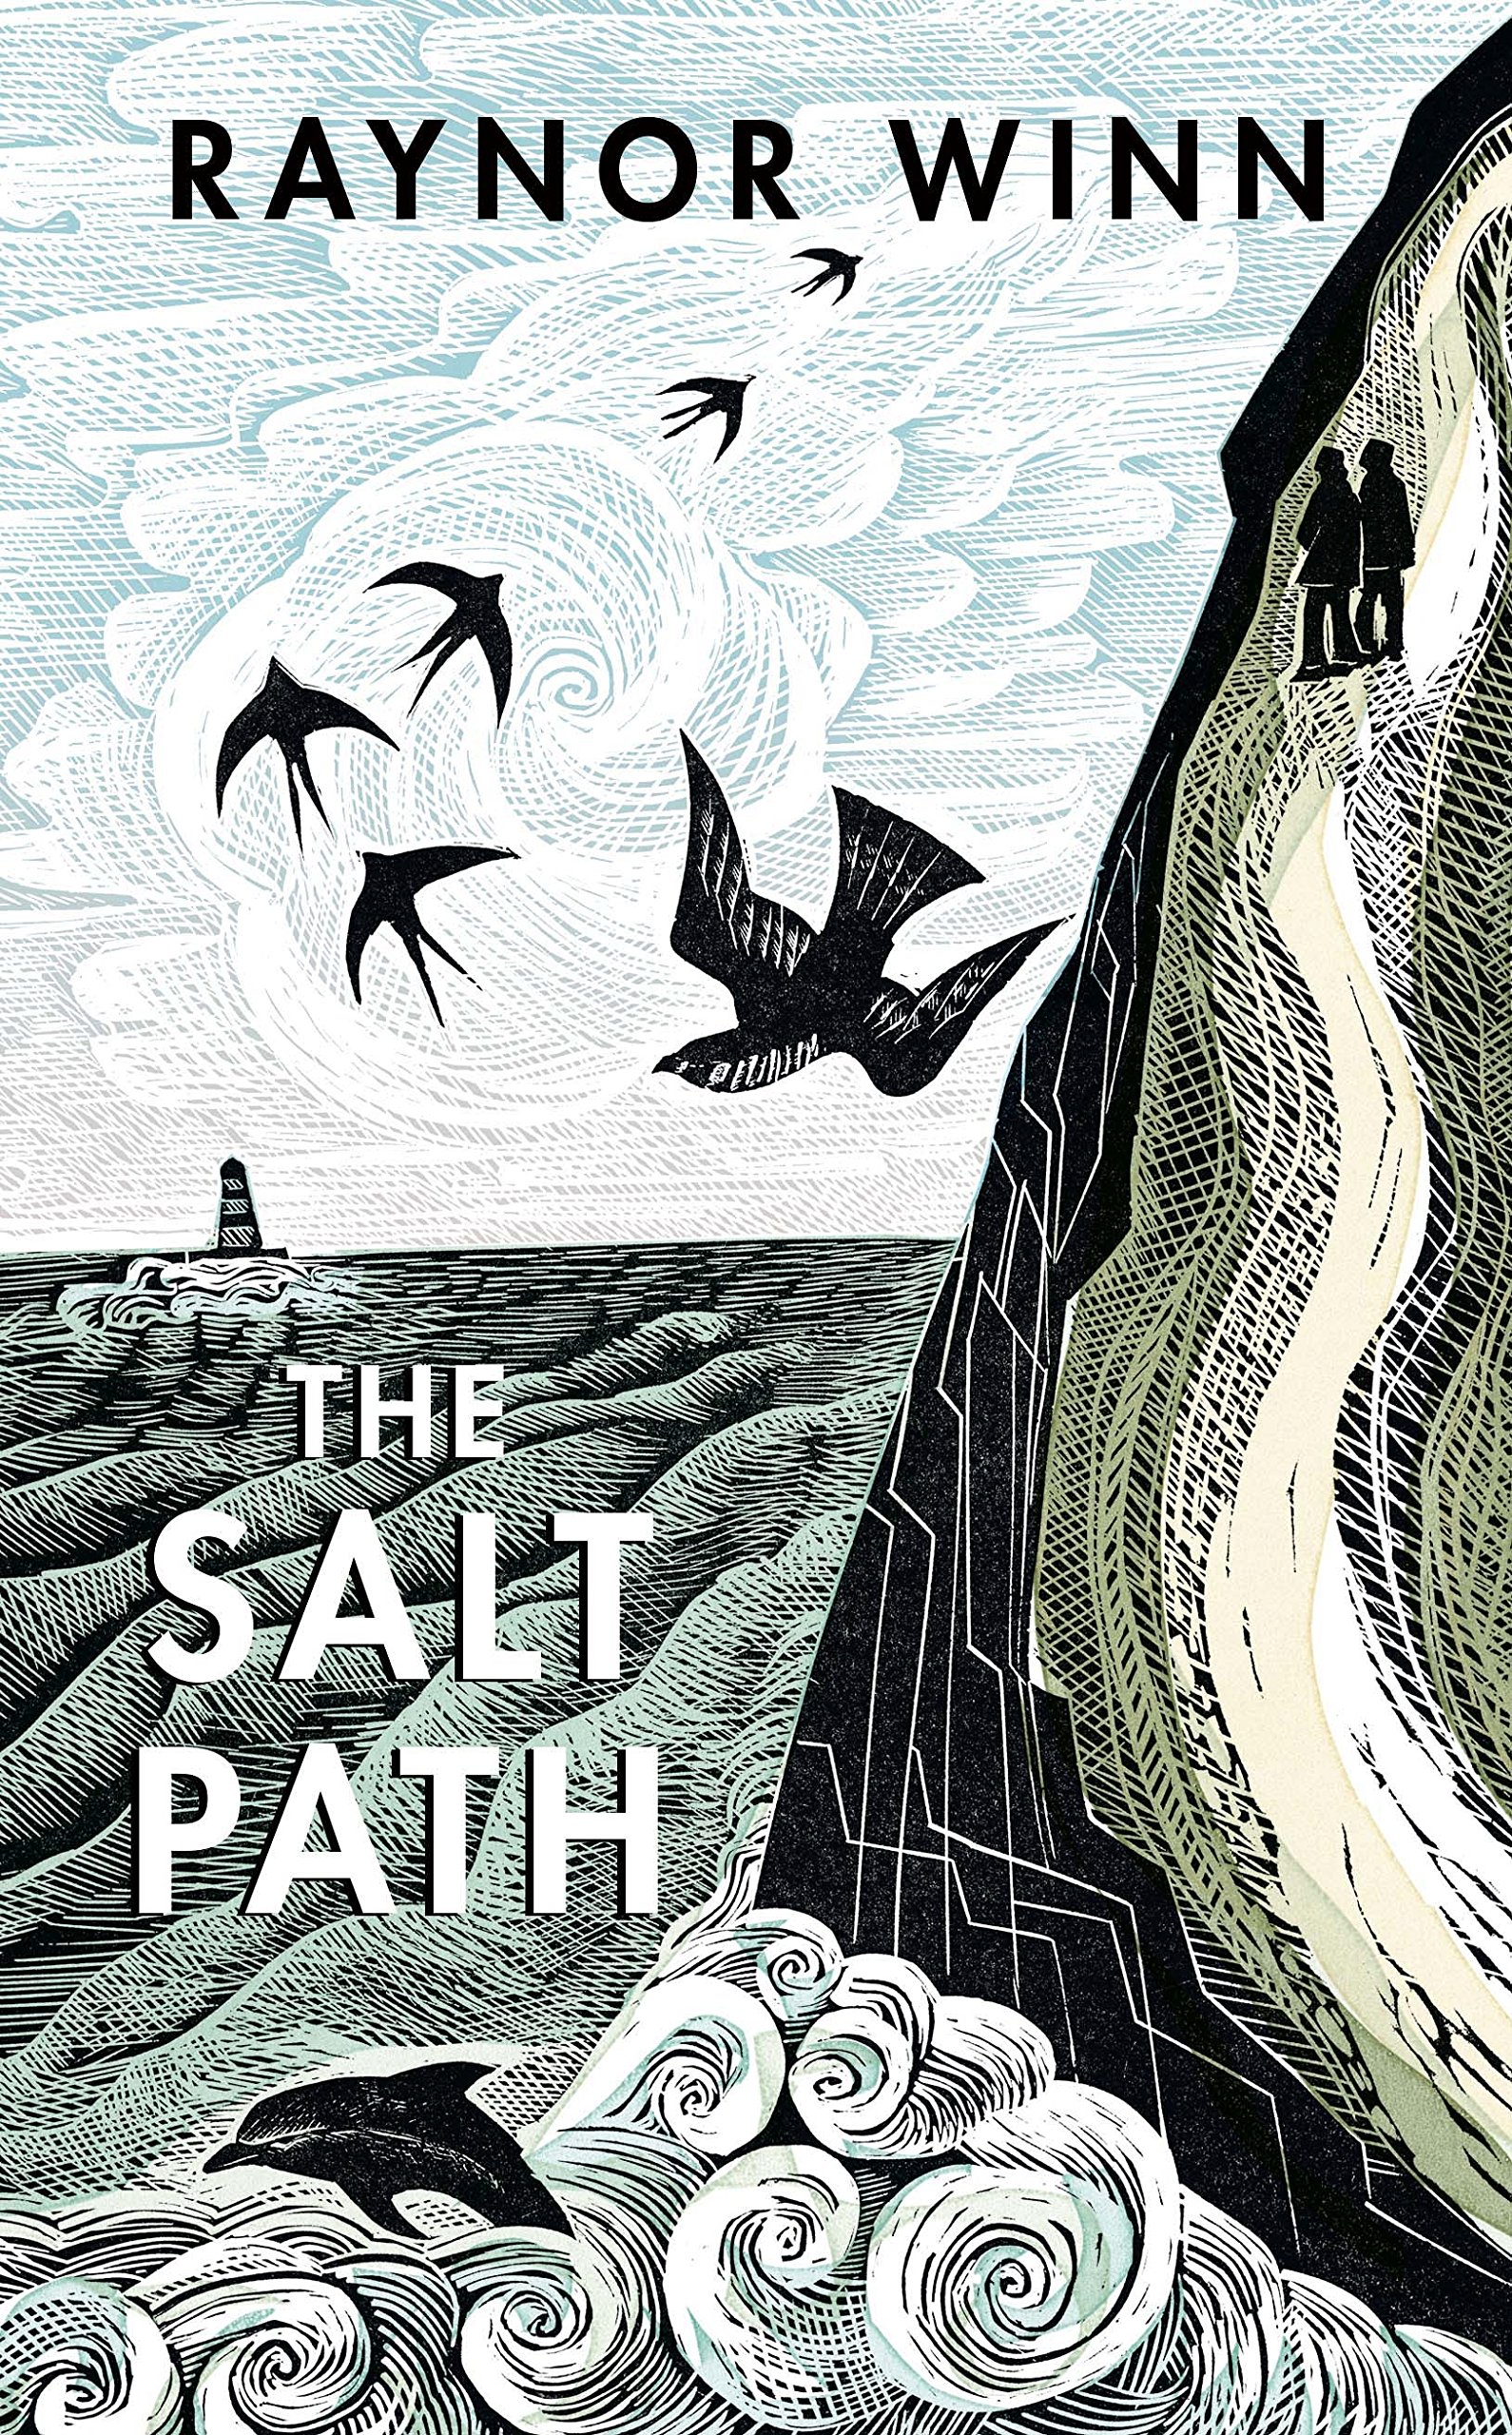 Scottish Families Book Group Review 'The Salt Path’ by Raynor Winn SFAD